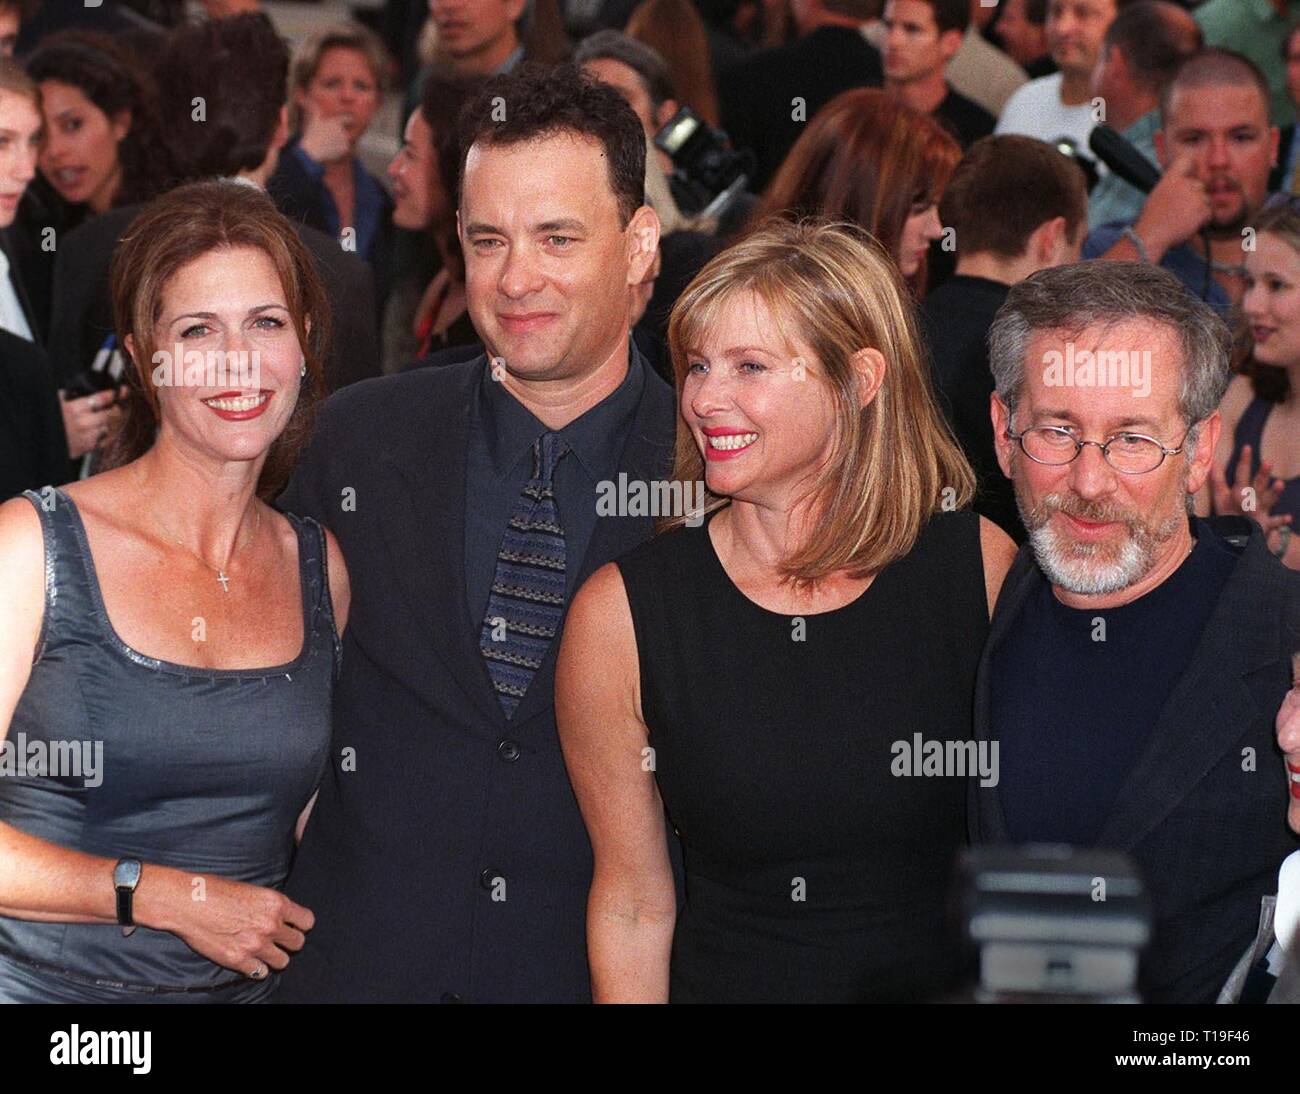 LOS ANGELES, CA - July 21, 1998:  Director STEVEN SPIELBERG (right) & wife KATE CAPSHAW with actor TOM HANKS & actress wife RITA WILSON at the world premiere of their new movie, 'Saving Private Ryan,' in Los Angeles. Stock Photo